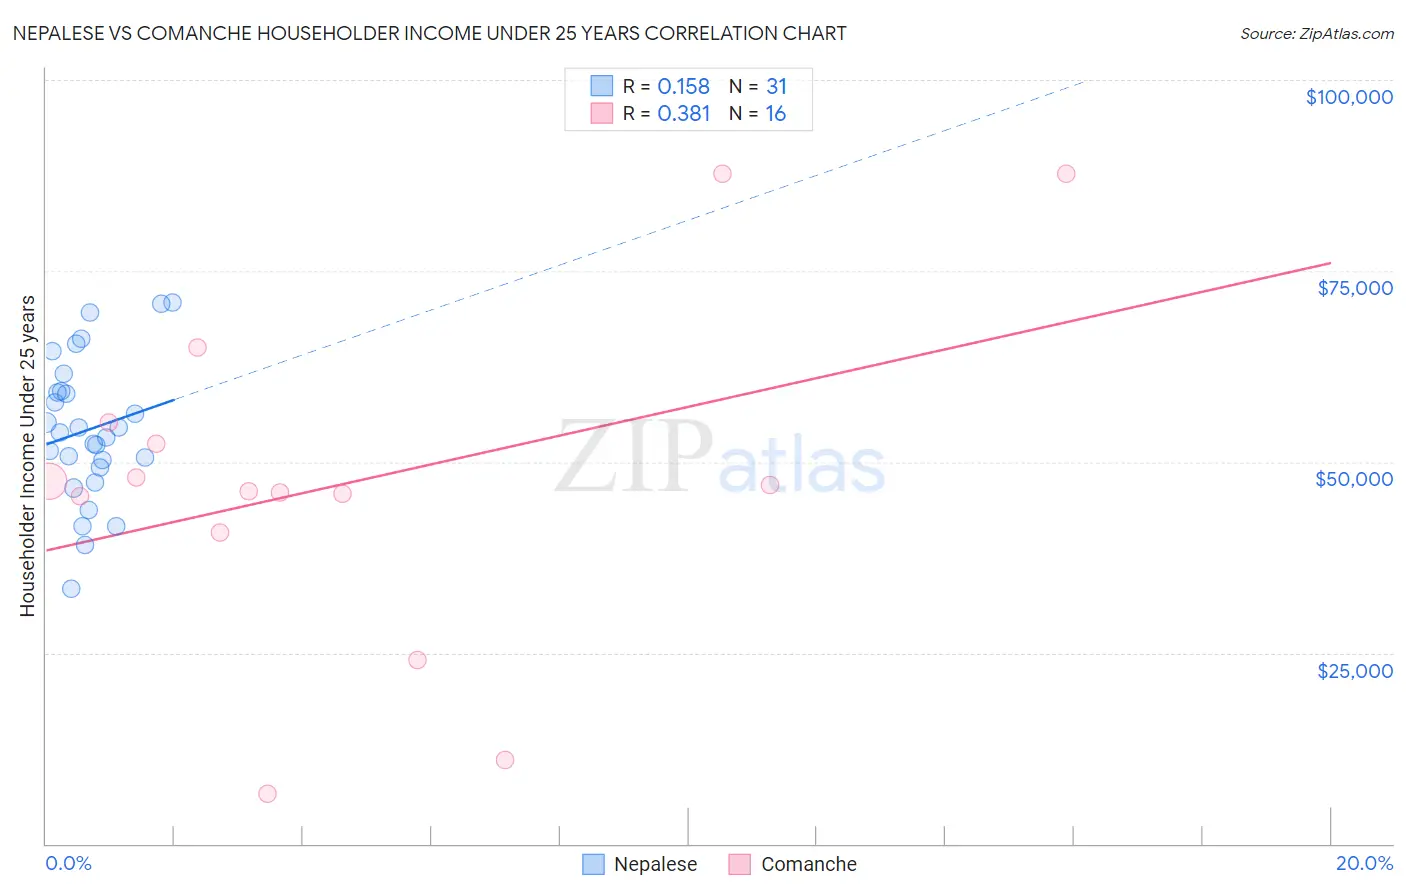 Nepalese vs Comanche Householder Income Under 25 years